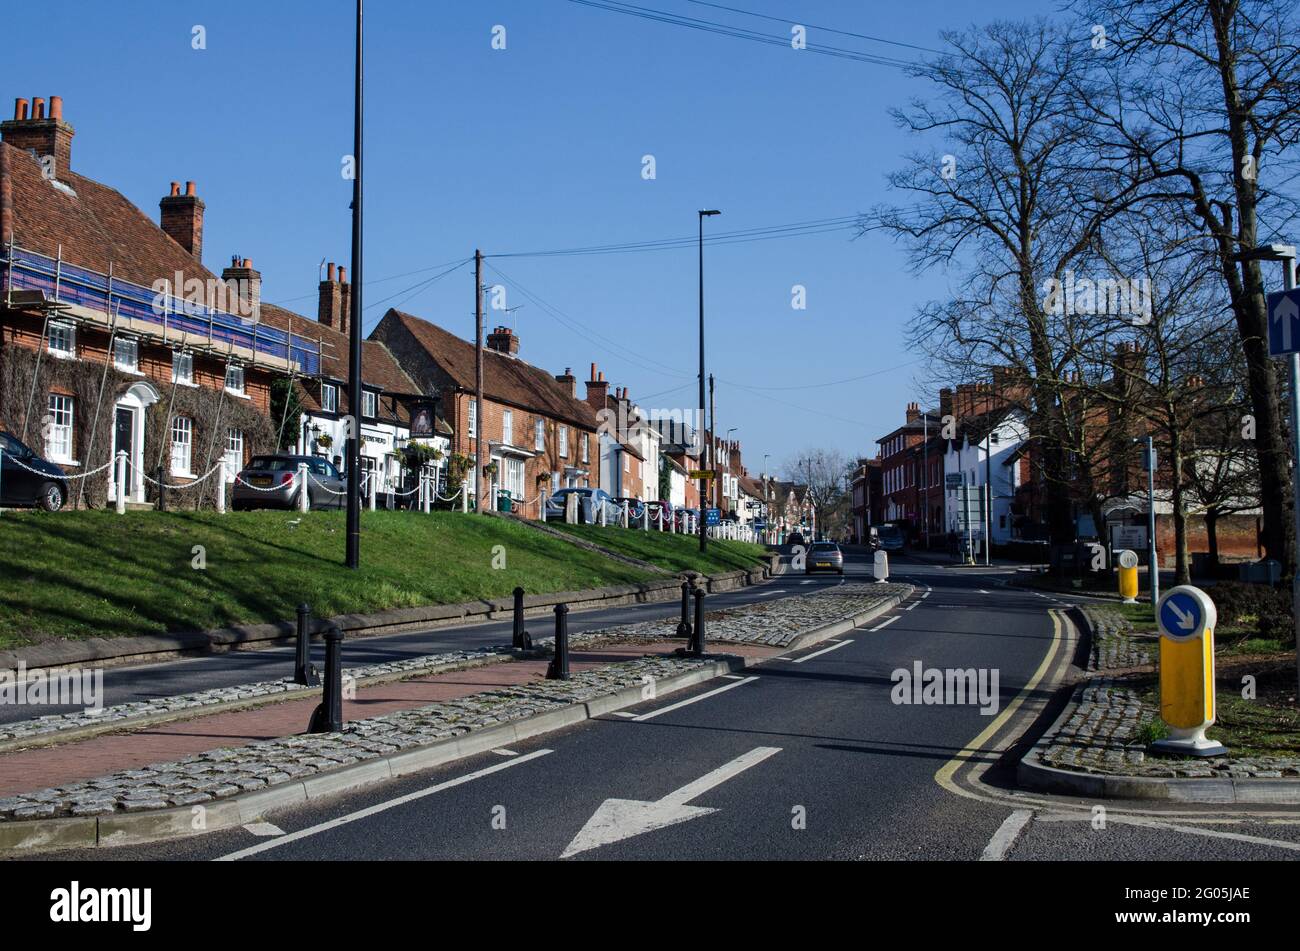 Wokingham, UK - February 28, 2021:  View of the historic Terrace and Shute End in the middle of the Berkshire town of Wokingham on a sunny Spring day. Stock Photo